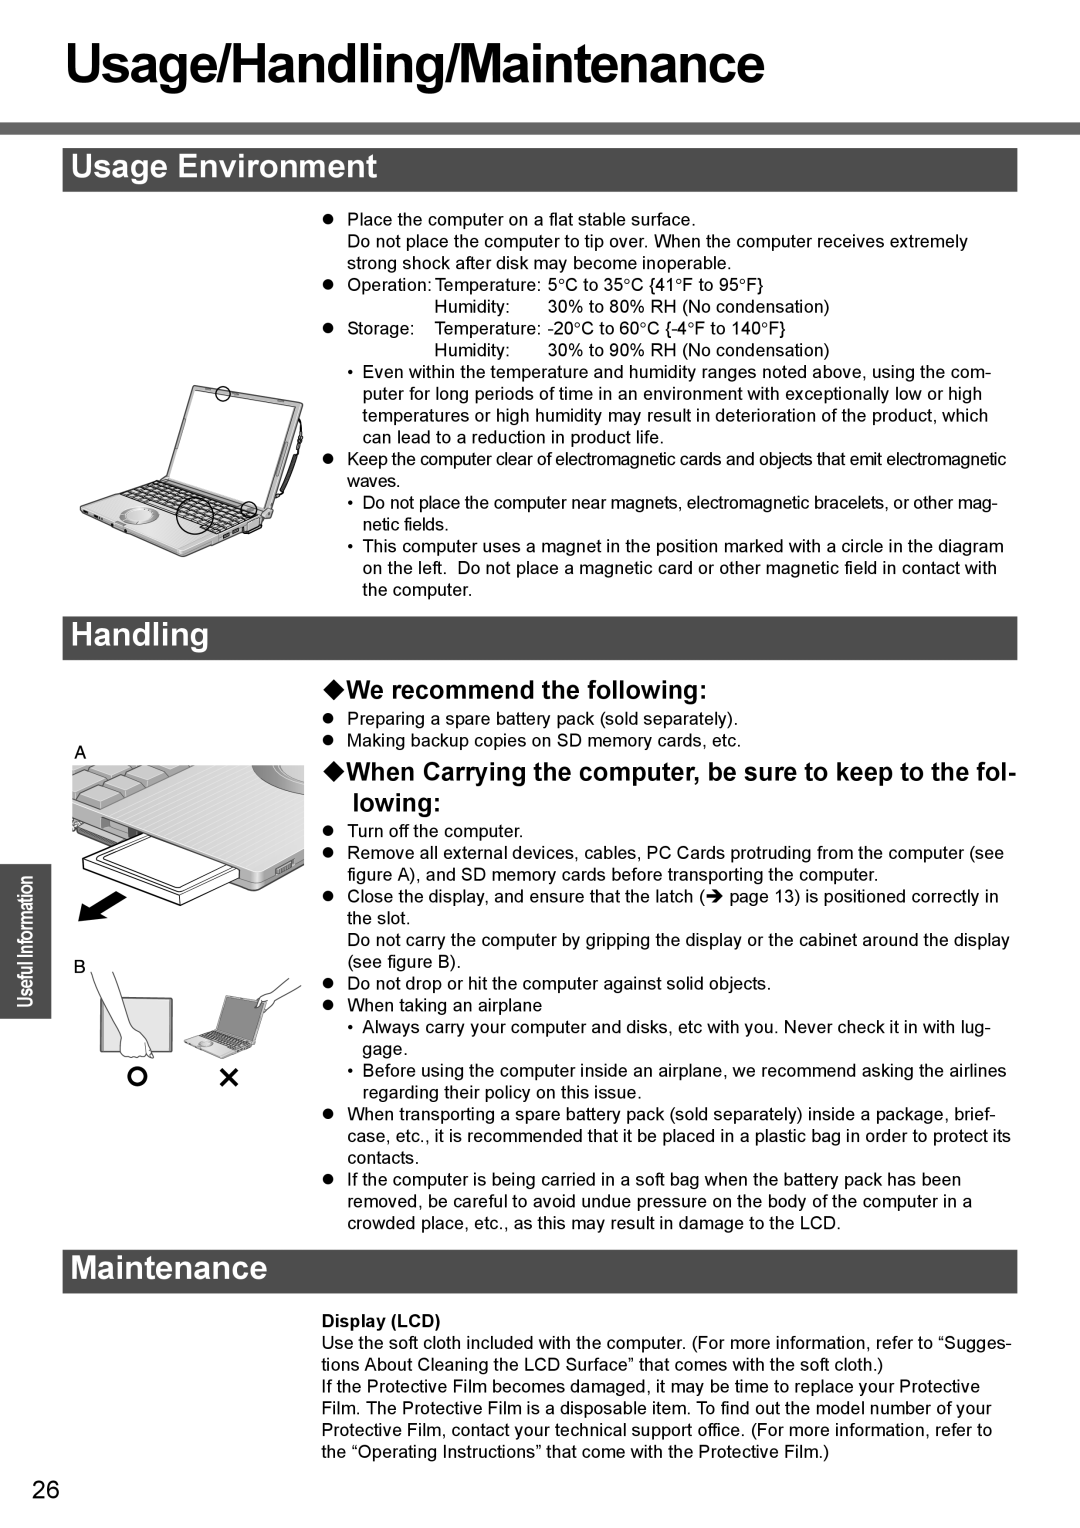 Panasonic CF-T4 operating instructions Usage/Handling/Maintenance, Usage Environment, ‹We recommend the following 